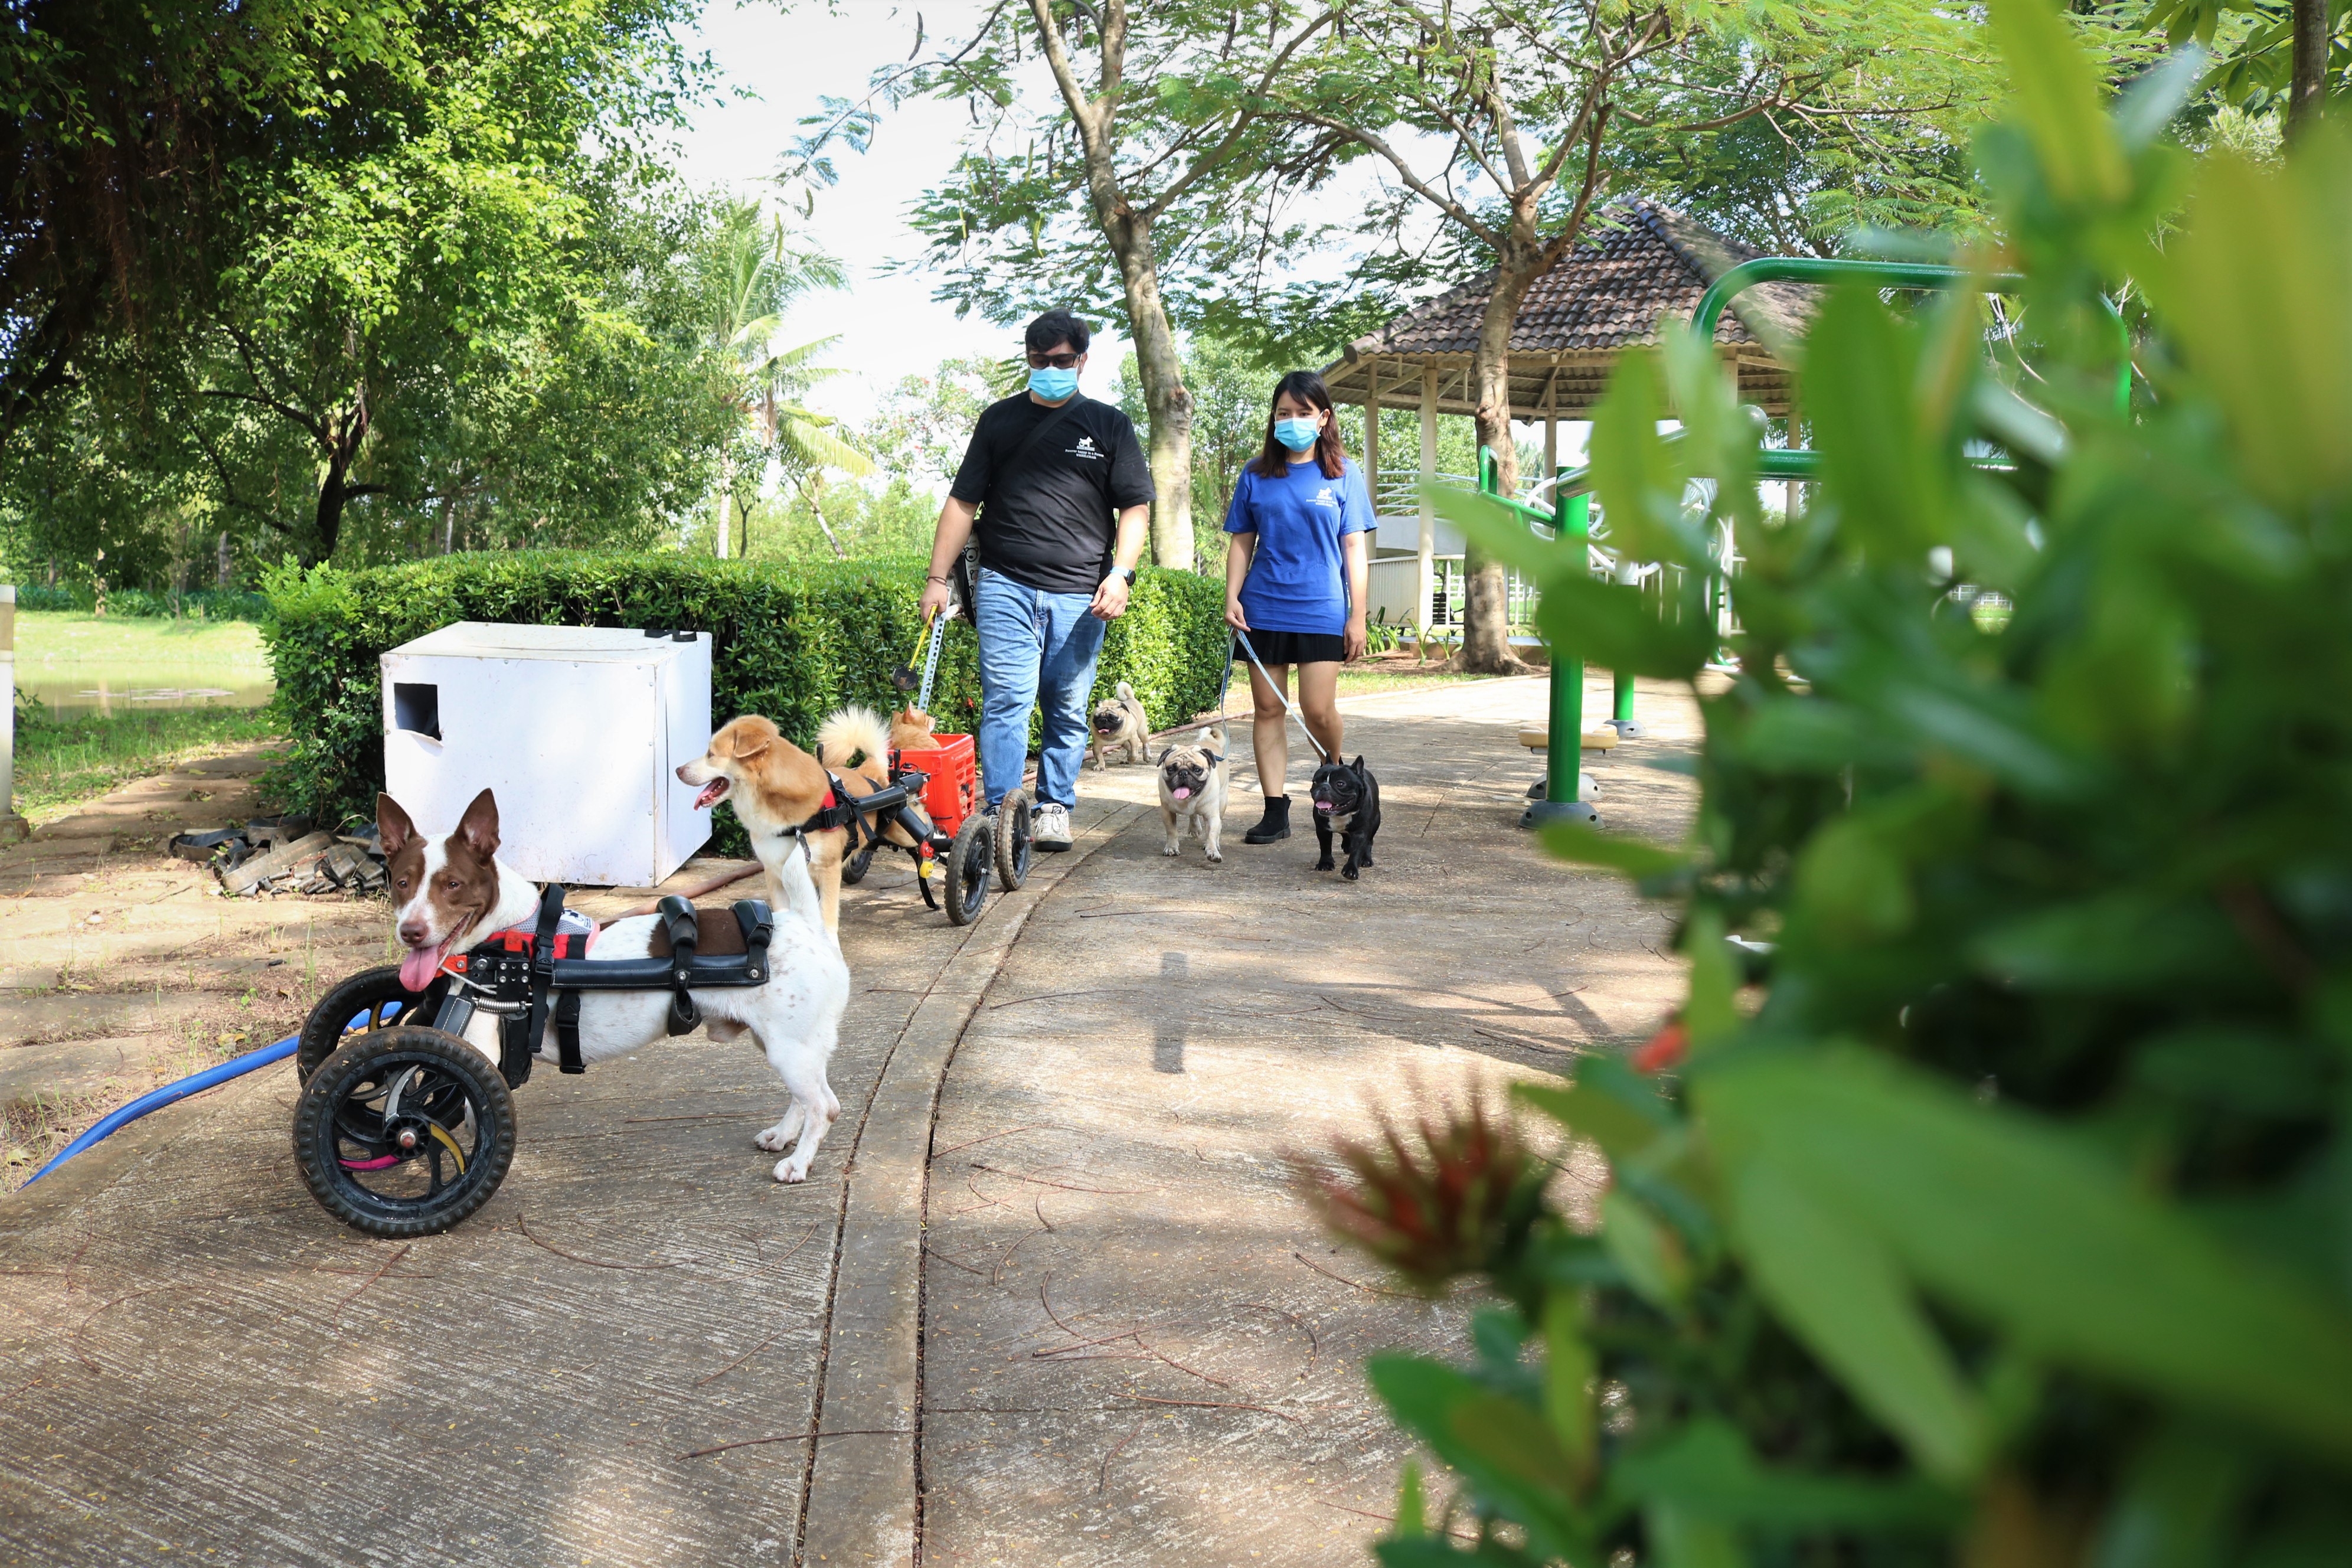 Vietnamese-Colombian couple devotes heart, efforts to helping paralyzed dogs walk again